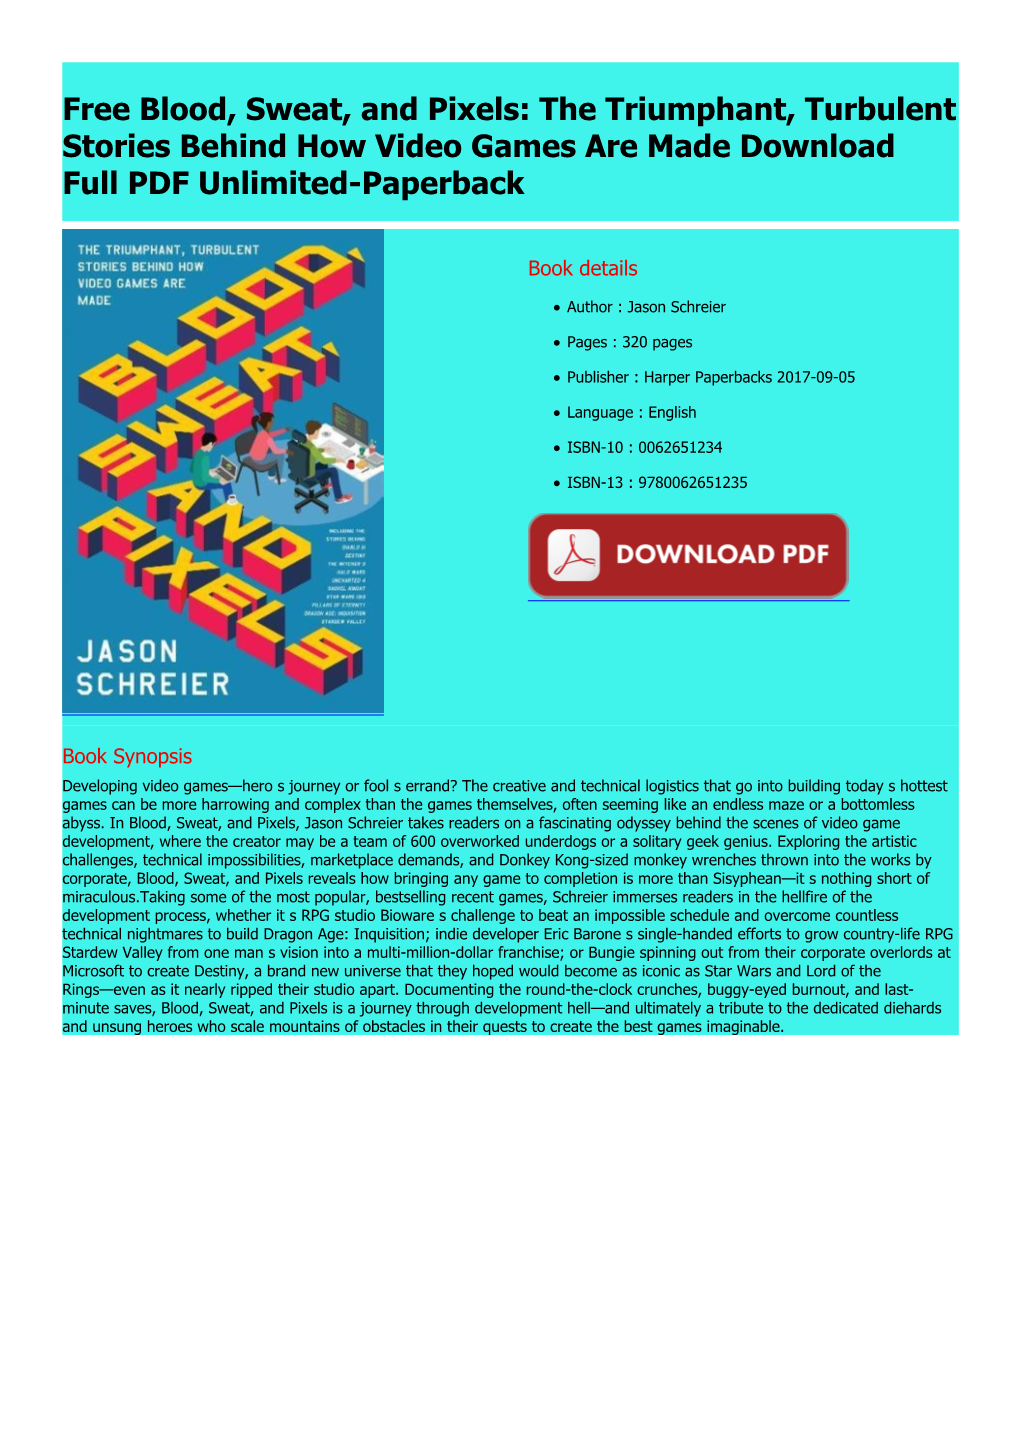 Free Blood, Sweat, and Pixels: the Triumphant, Turbulent Stories Behind How Video Games Are Made Download Full PDF Unlimited-Paperback